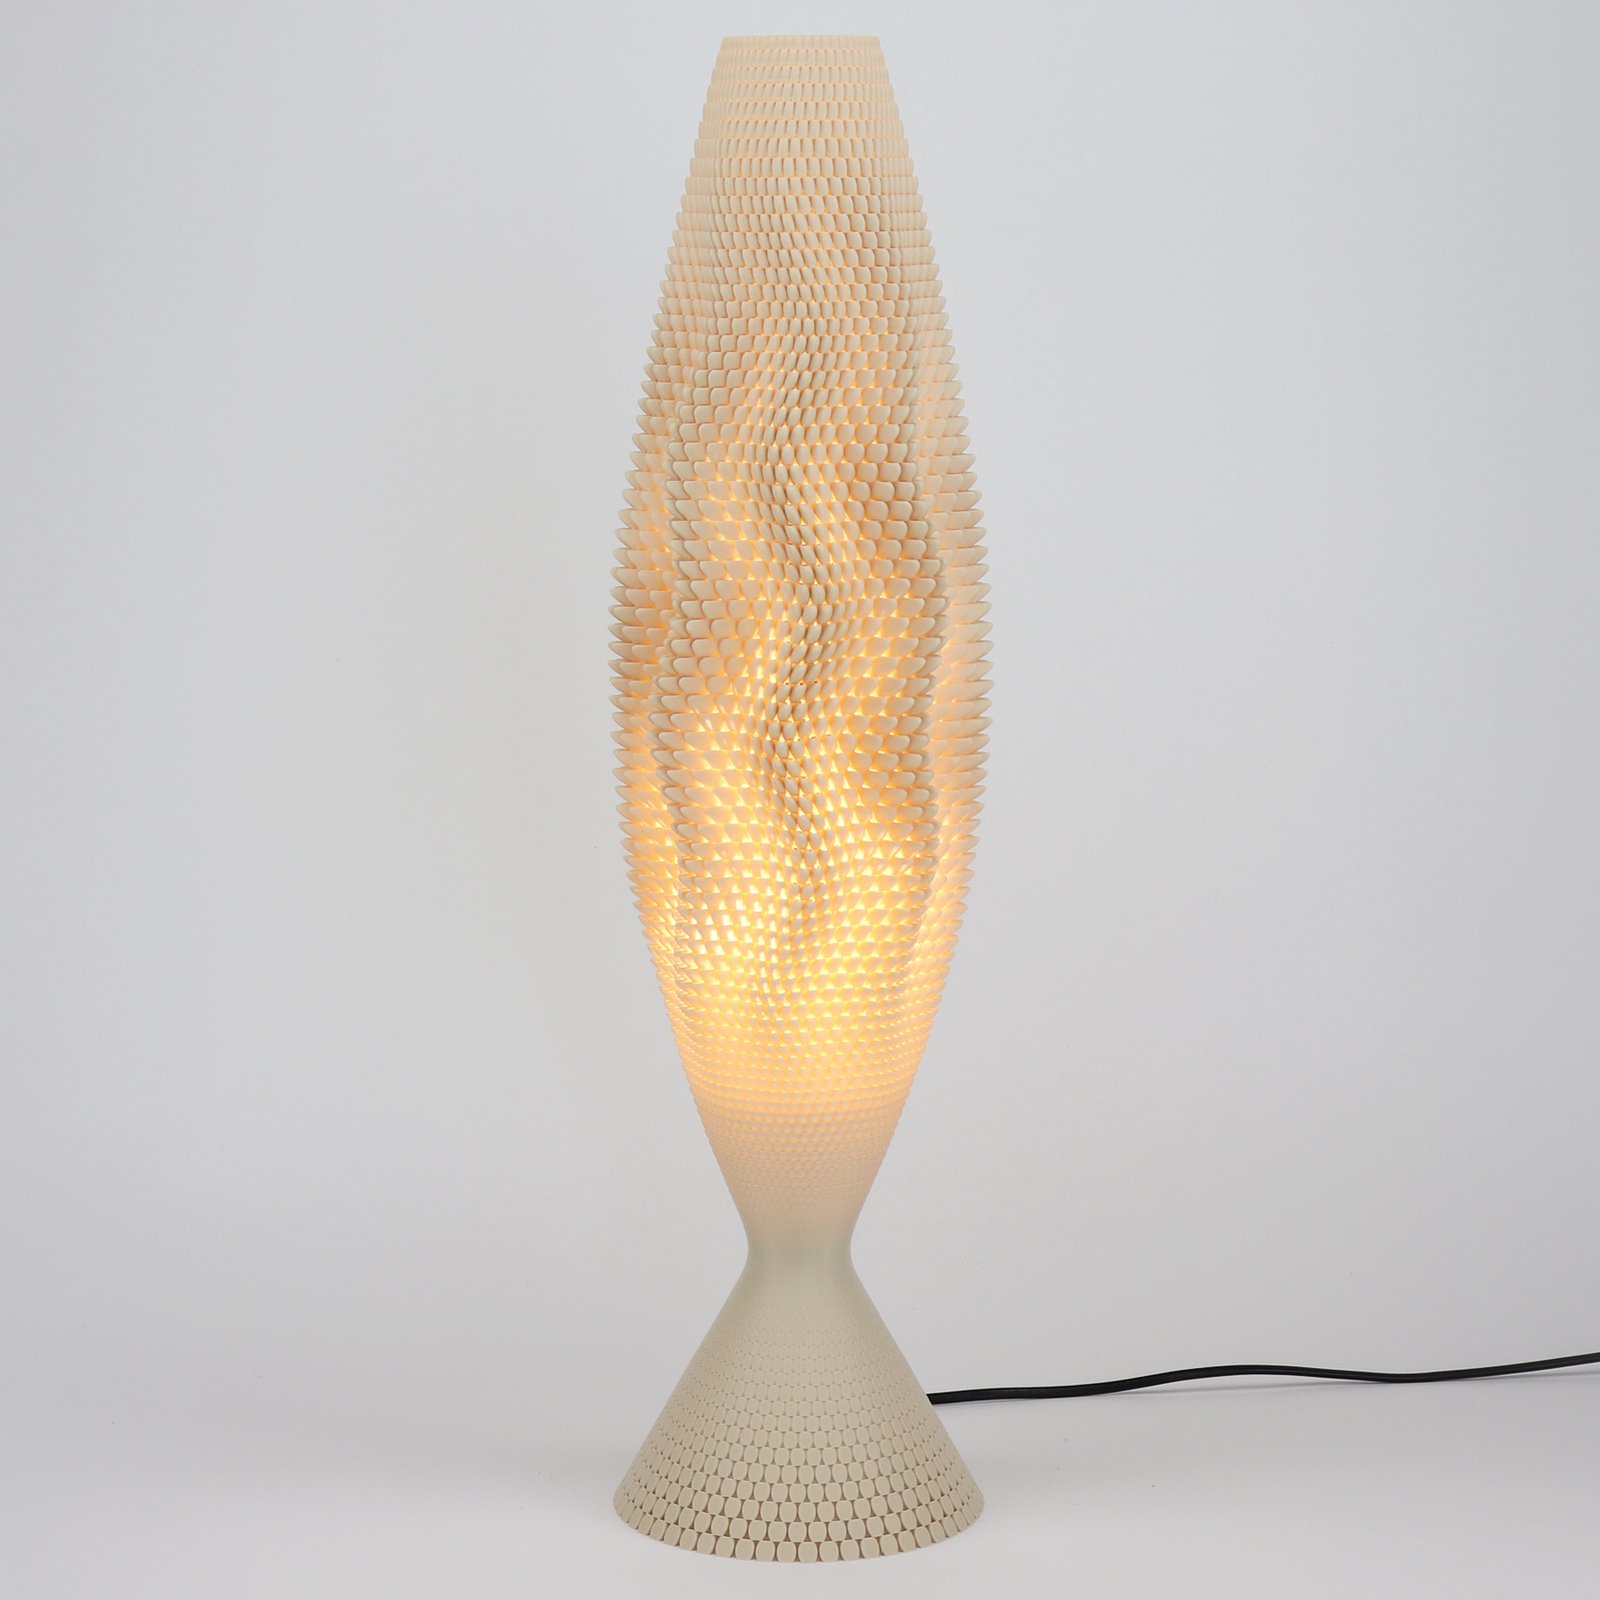 Koral table lamp made of organic material, Lines, 65 cm